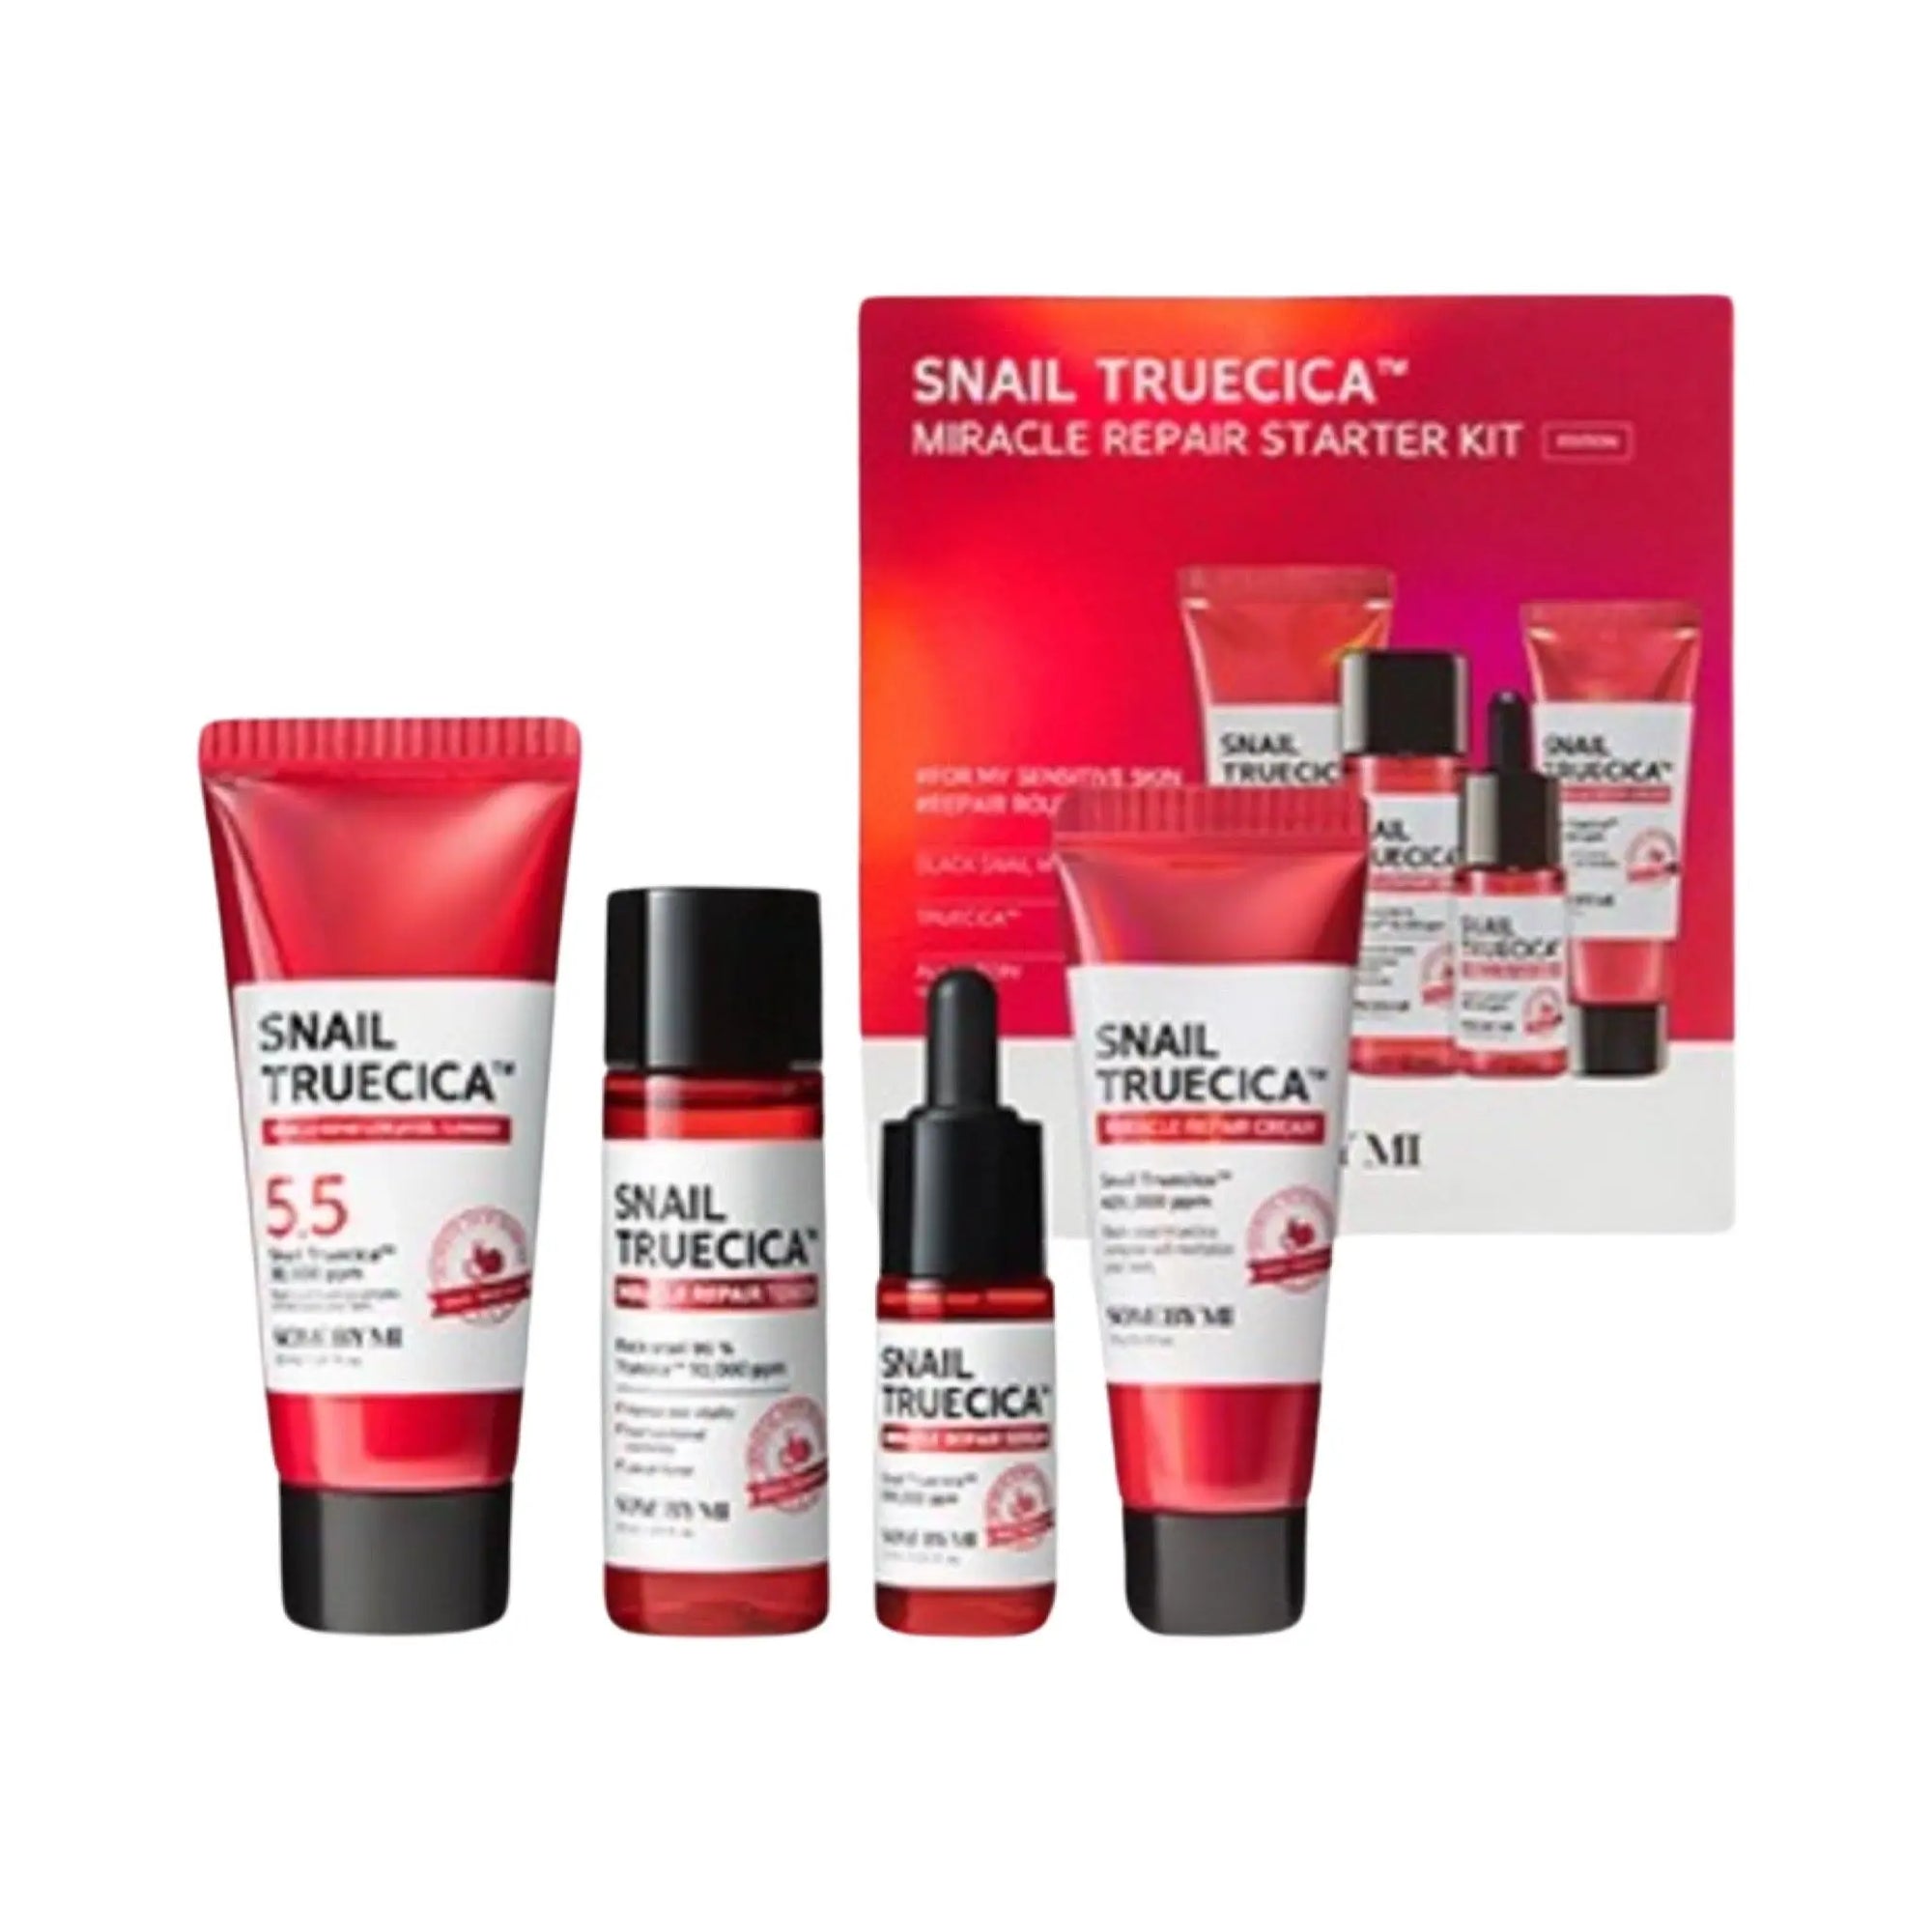 Some By Mi - Snail Truecica Miracle Repair Starter Kit Some By Mi